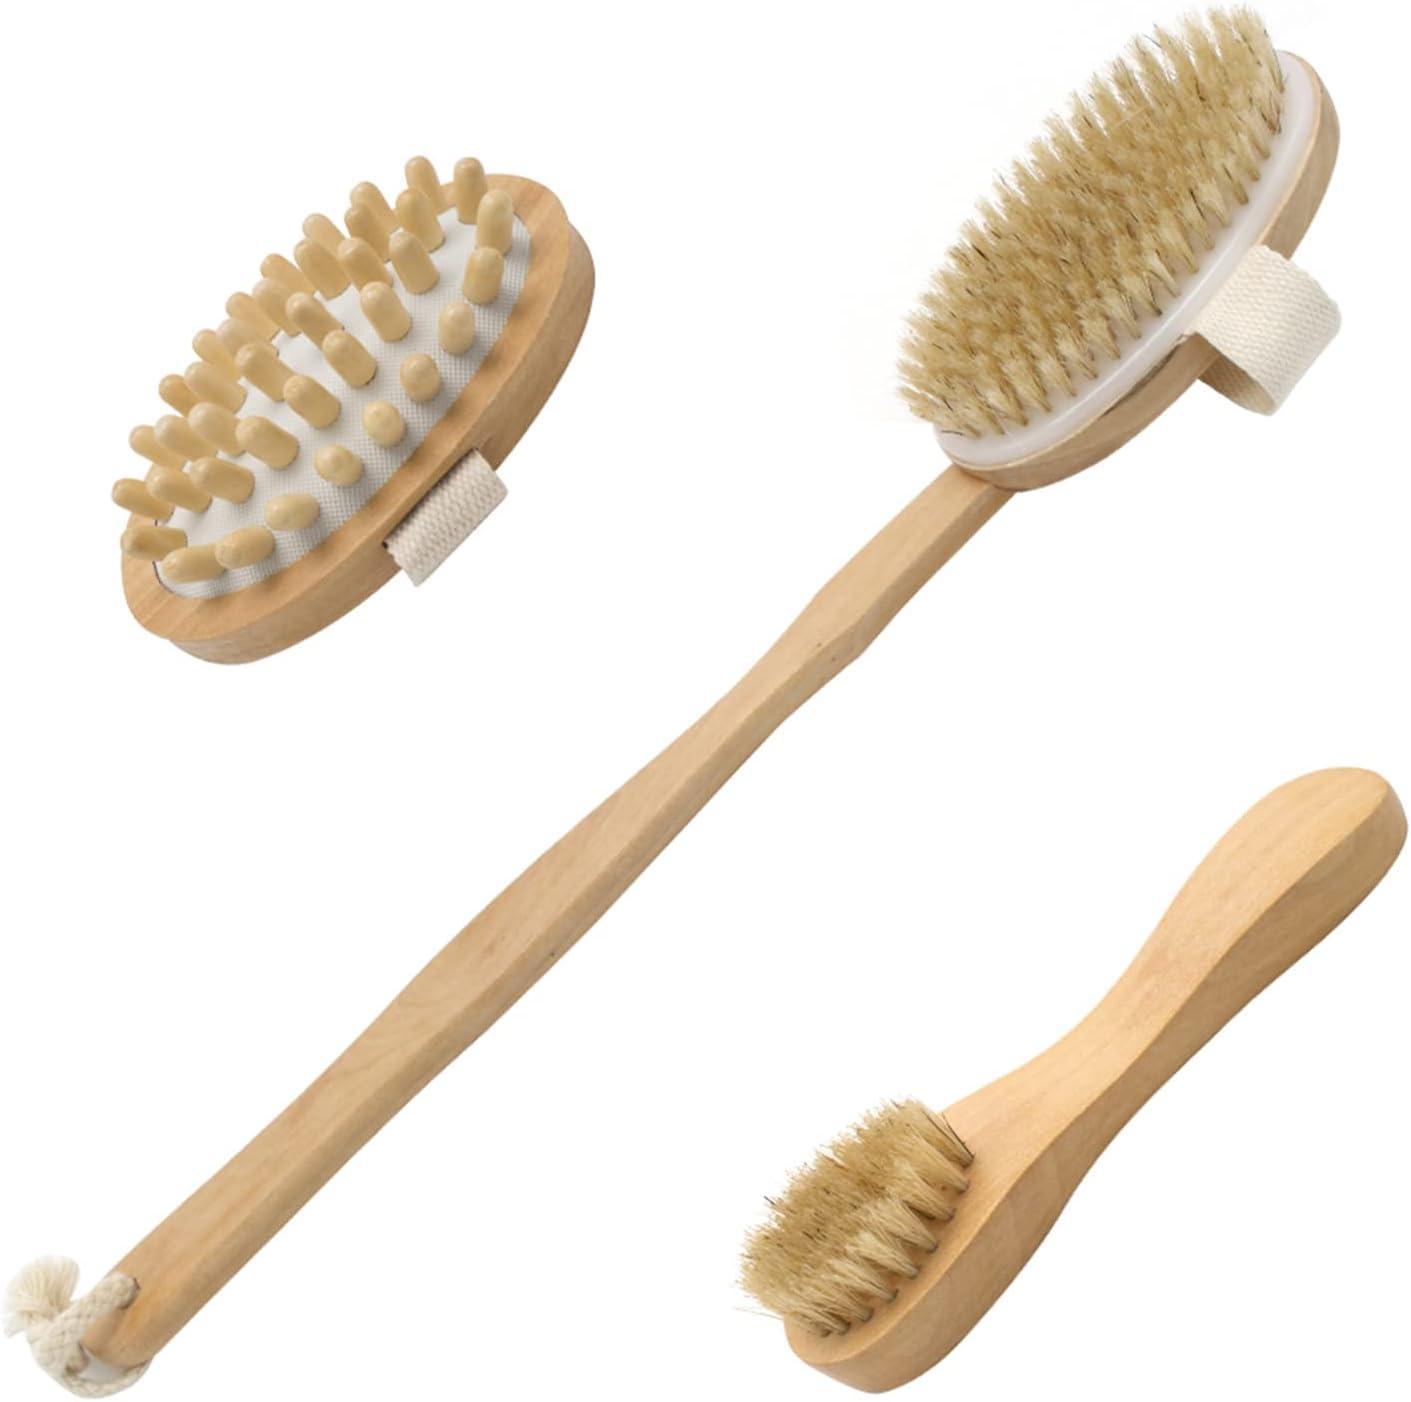 Dry Brushing Body Brush Set with 100% Natural Boar Bristles (Set of 3) | Skin Exfoliating Kit with Long Detachable Back Brush Contour Body and Face